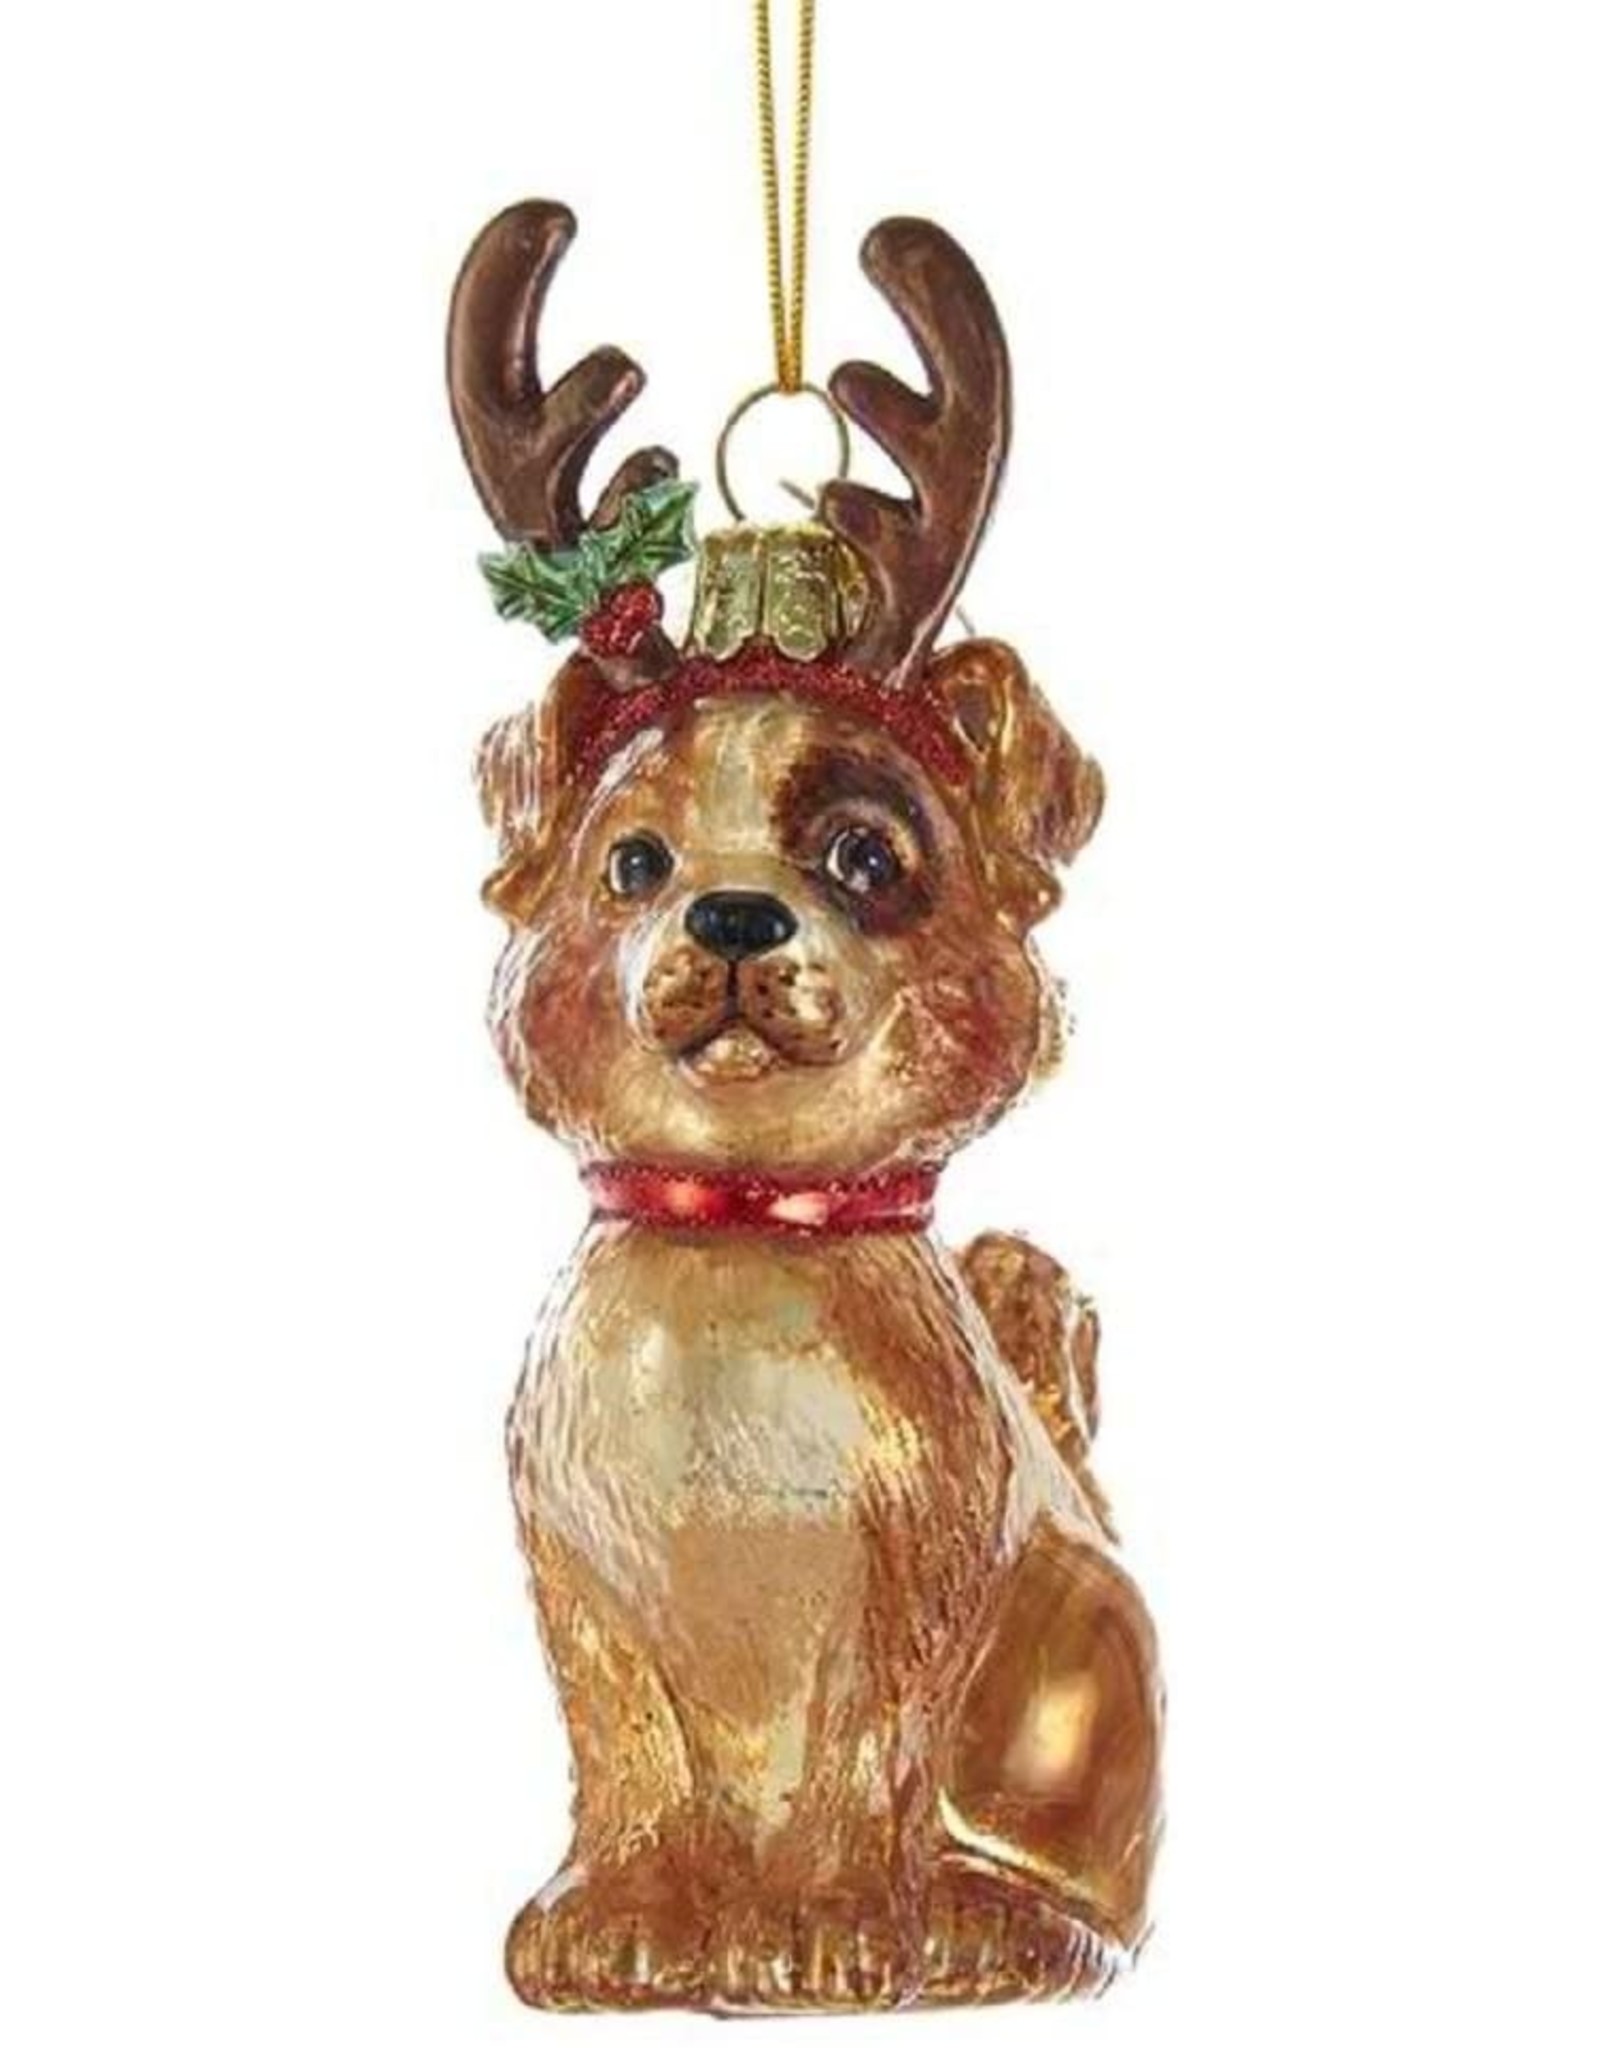 Kurt Adler Nobel Gems Mixed Breed With Antlers Glass Ornament